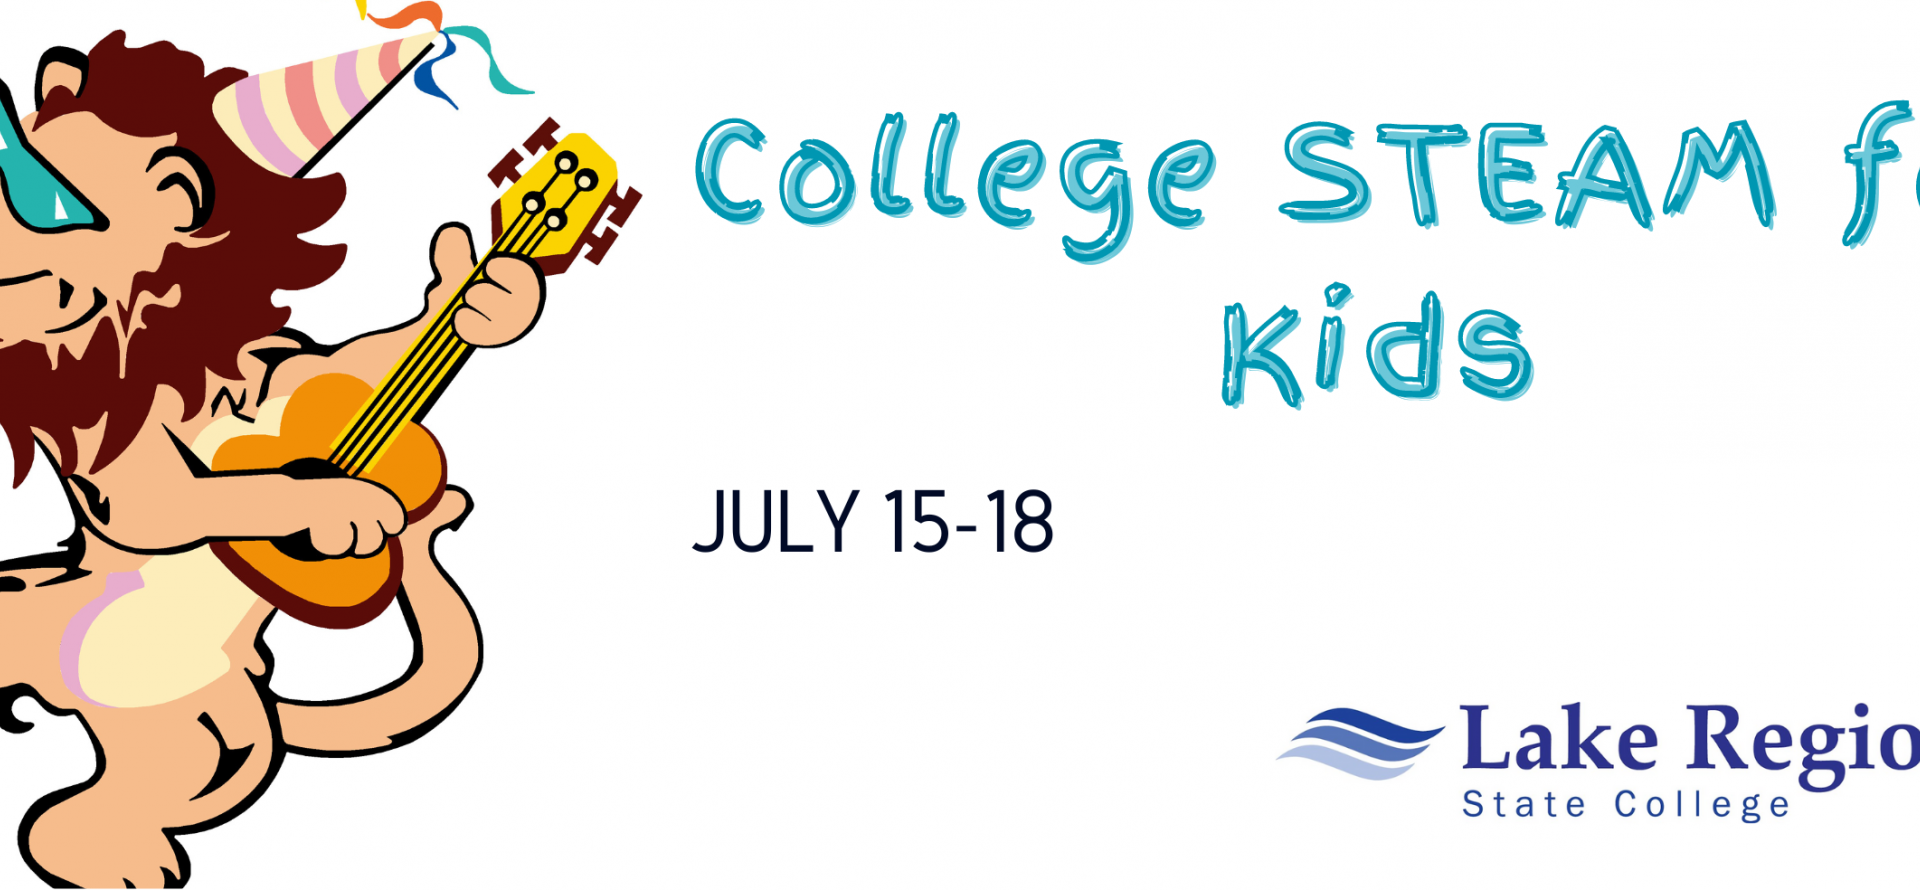 College STEAM for Kids July 15-18